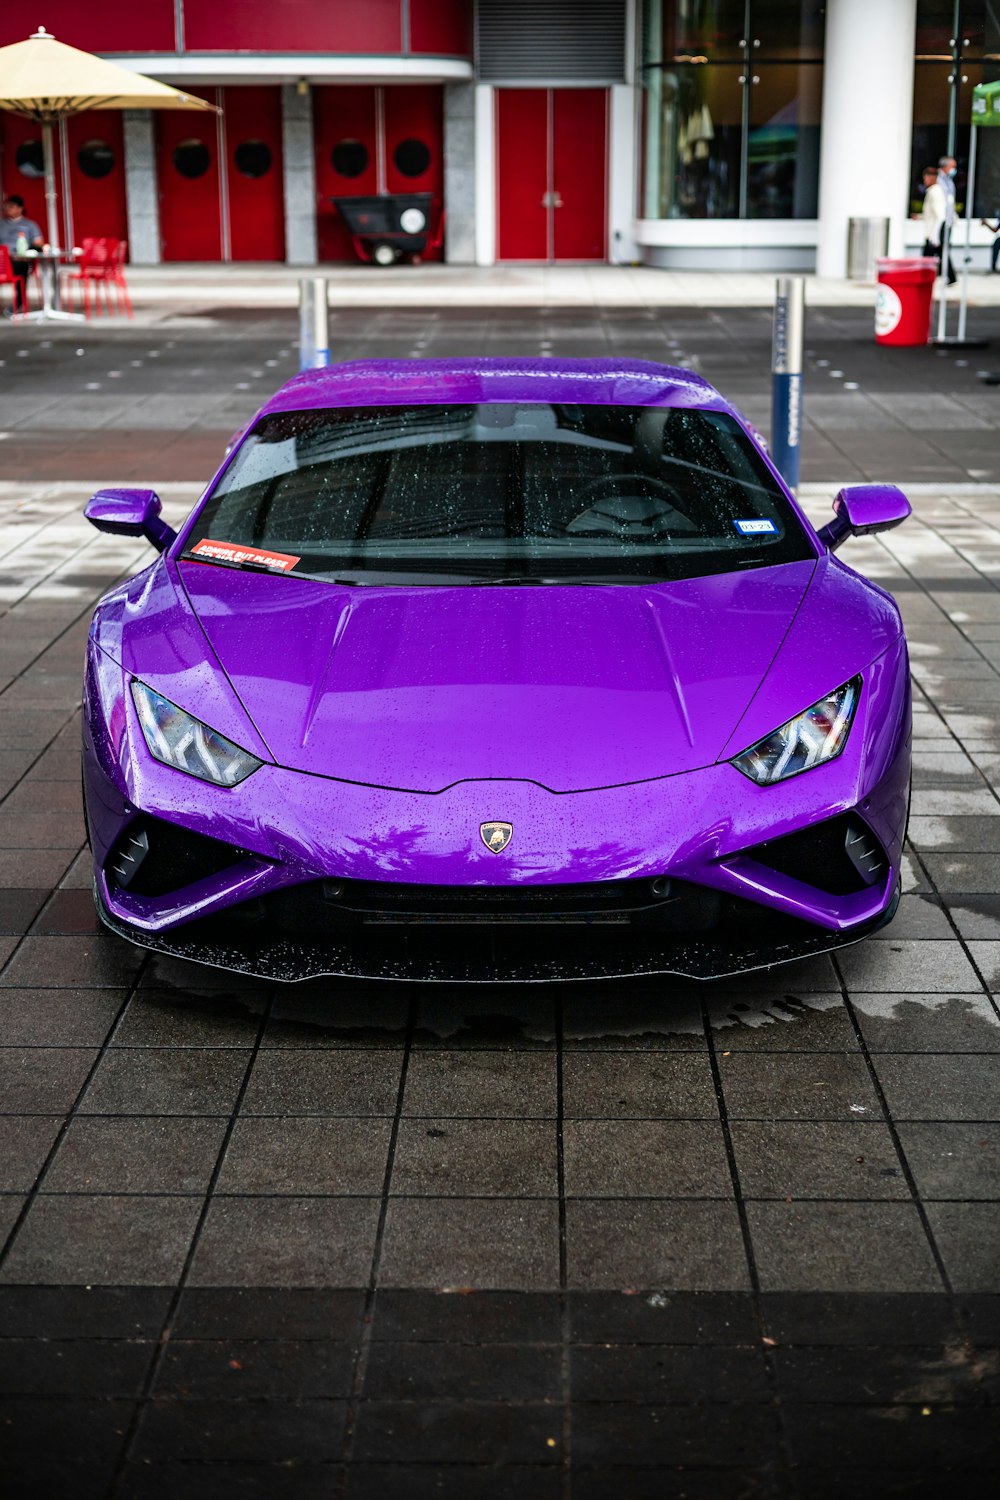 a purple sports car parked in front of a building